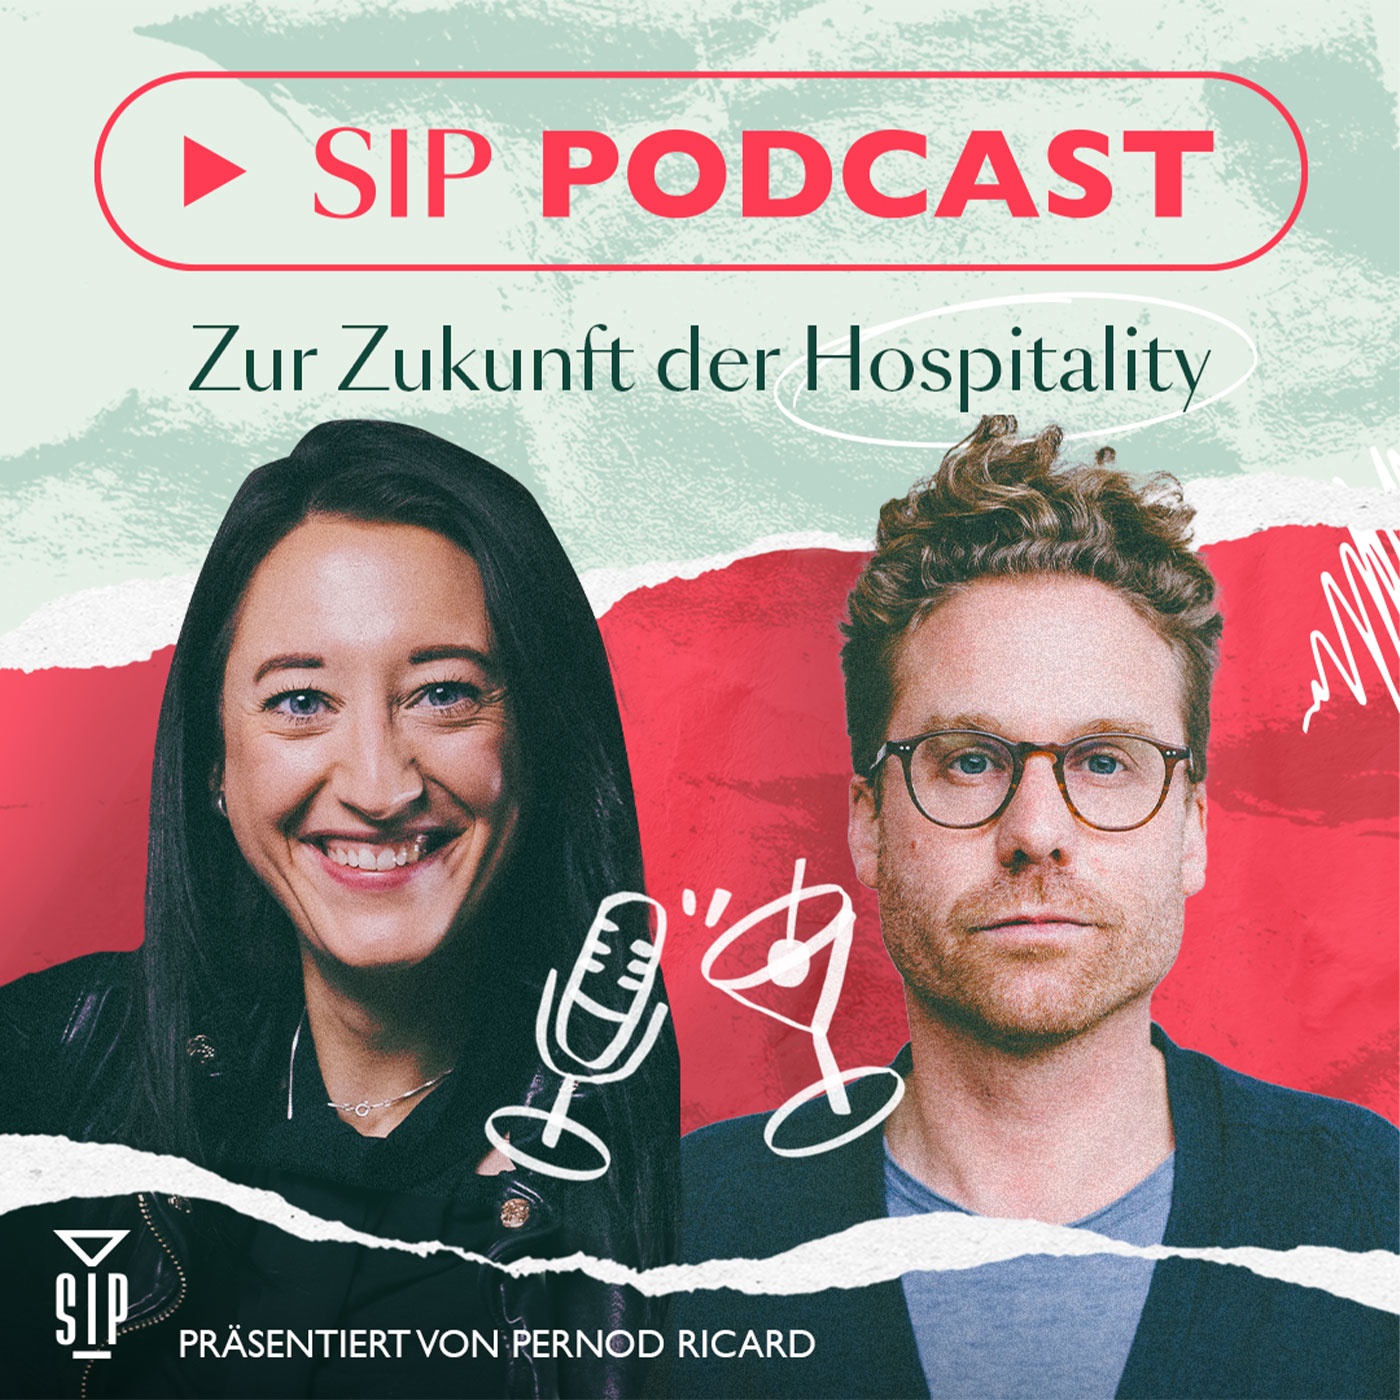 Hospitality Trends - was ist in 2023 angesagt? Mit Jan-Peter Wulf & Katharina Rittinger